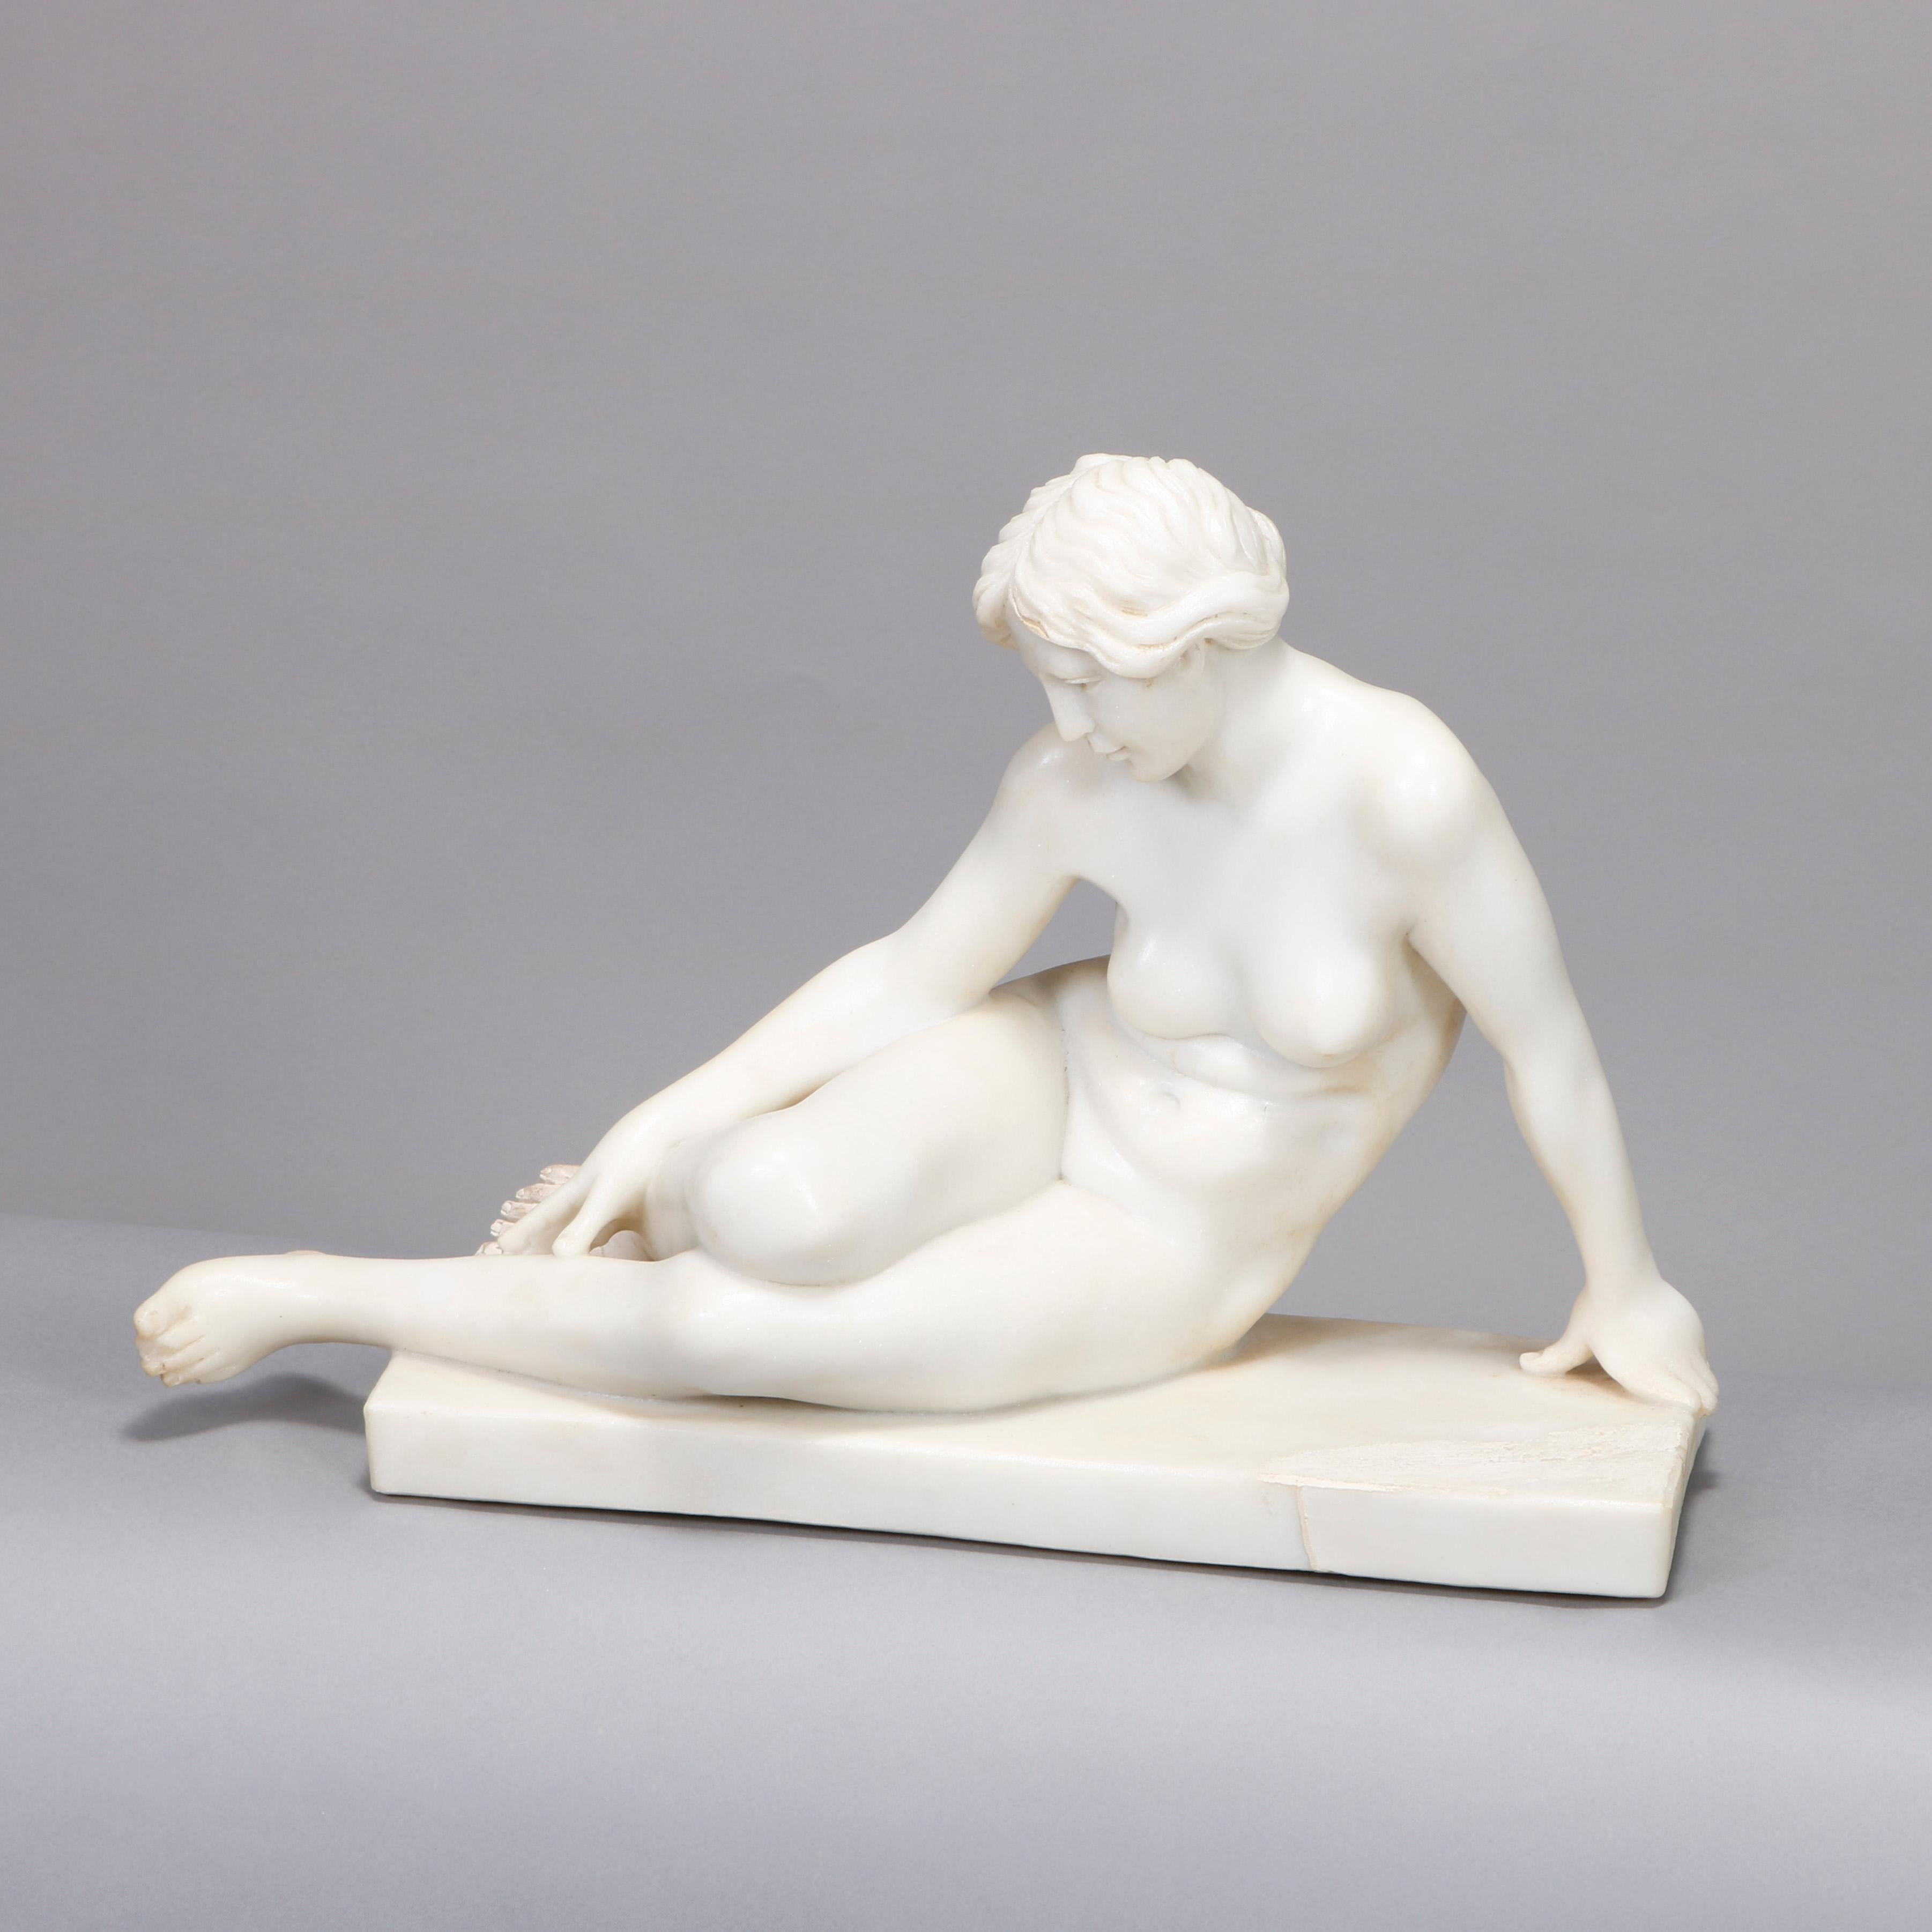 An Art Deco neoclassical carved alabaster portrait sculpture depicts recumbent young woman, early 20th century

Measures: 16.75